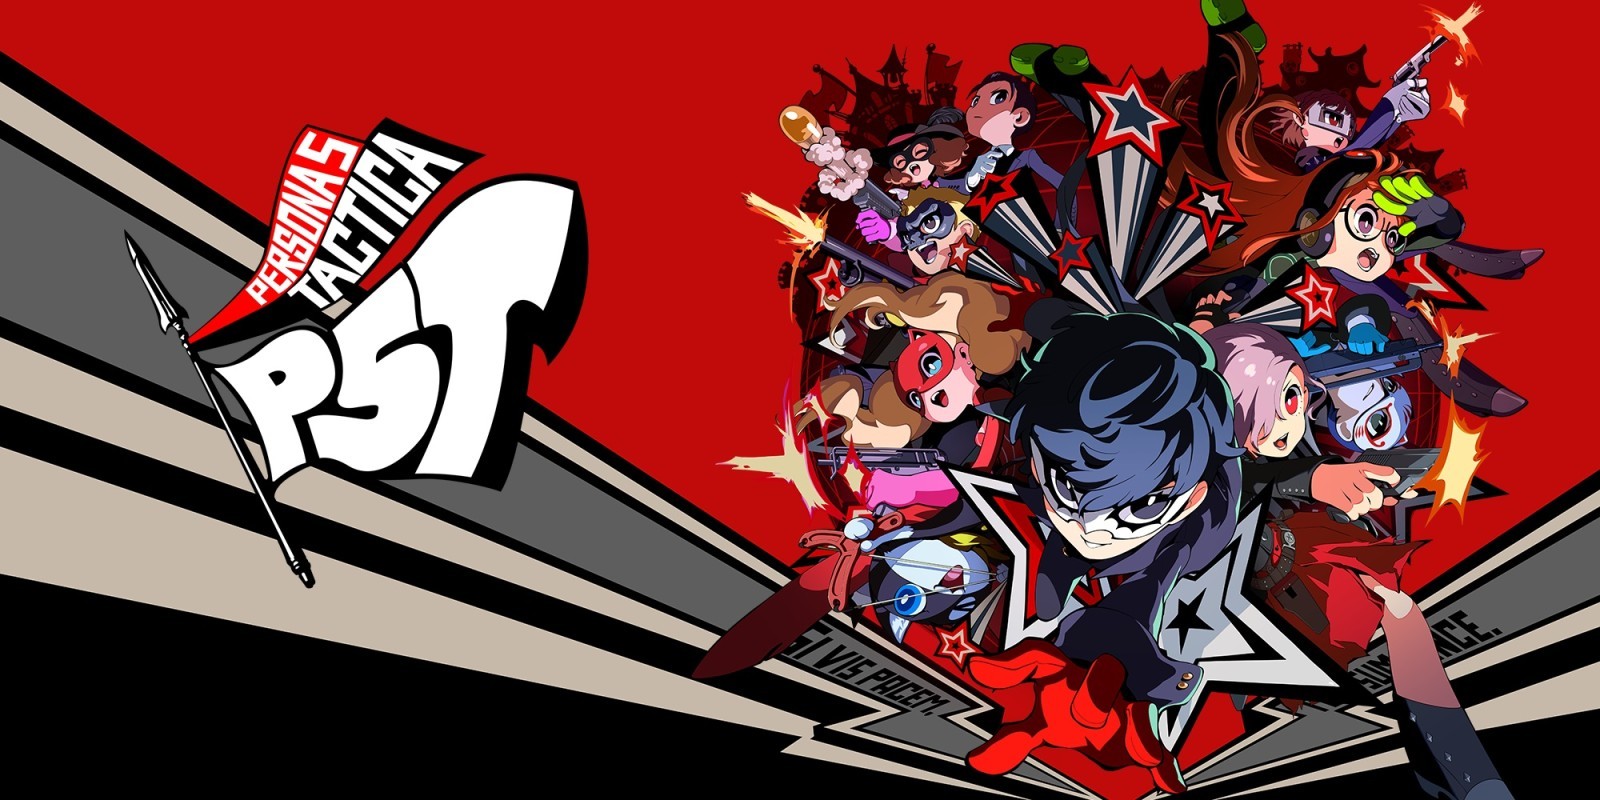 Persona 5 Tactics Review: "If you want peace, defeat yourself"